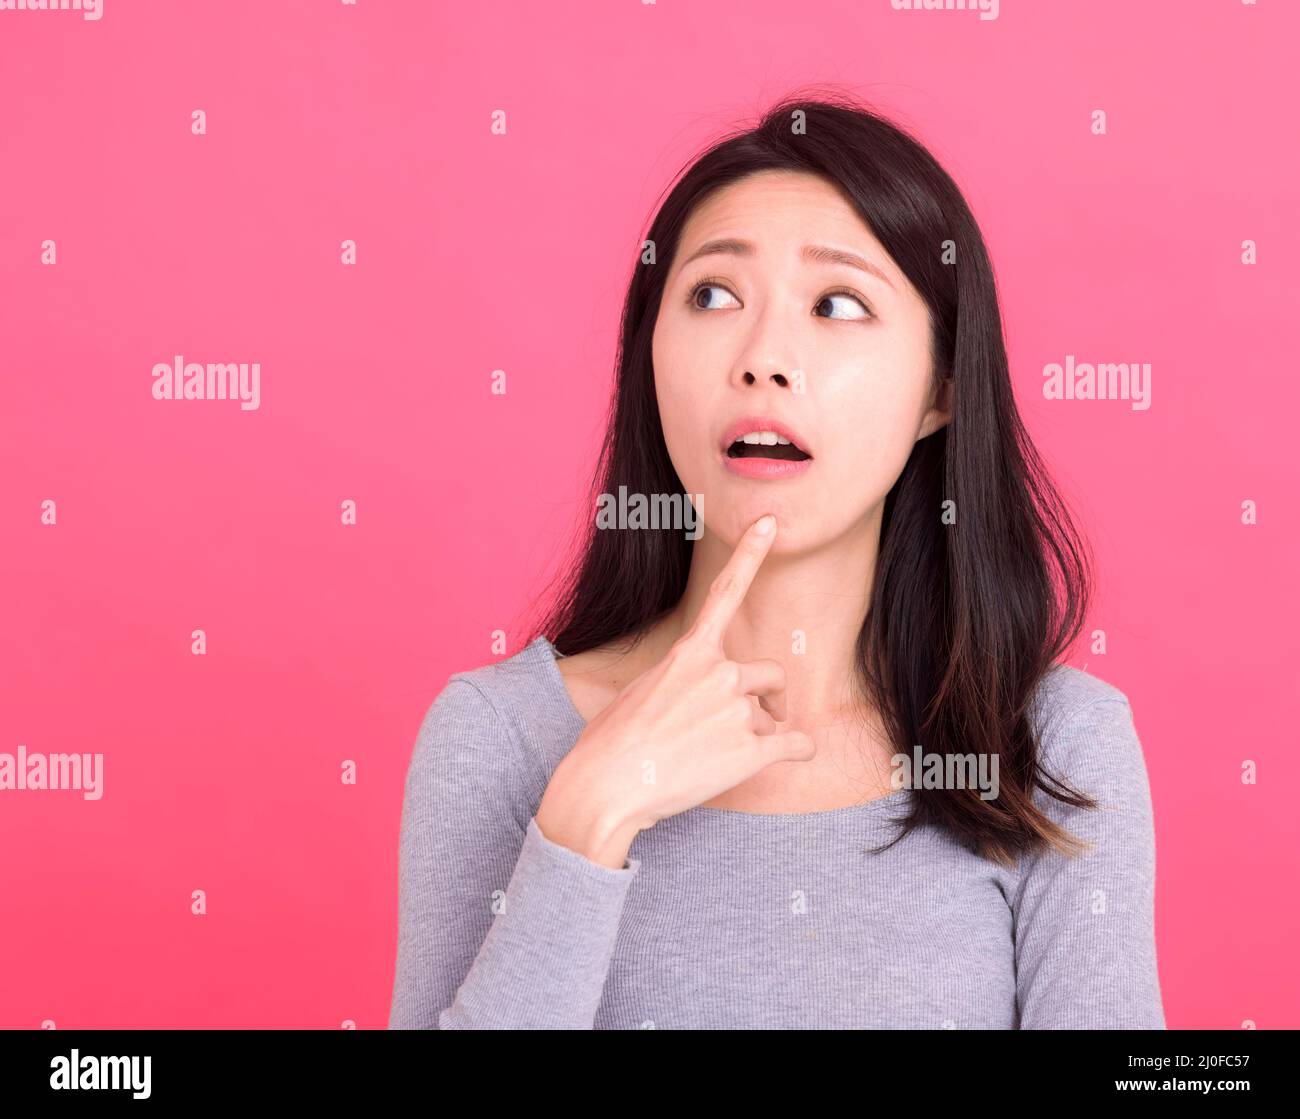 young woman serious look empty space think ponder minded deep idea isolated on pink background Stock Photo